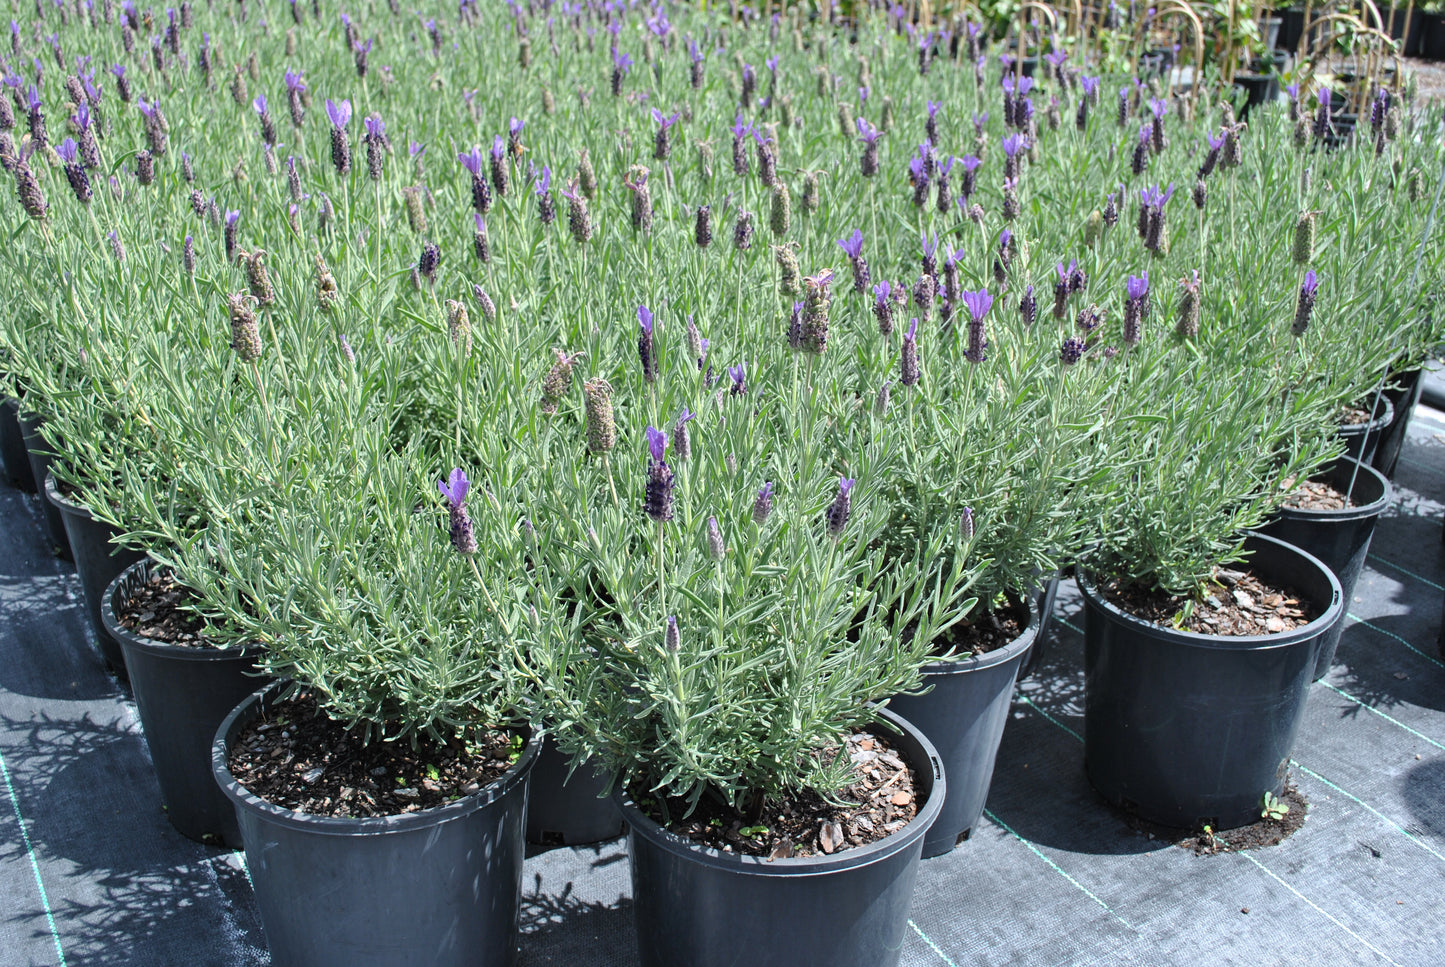 Beautiful purple flowers on the Lavendula french 'French Lavender'